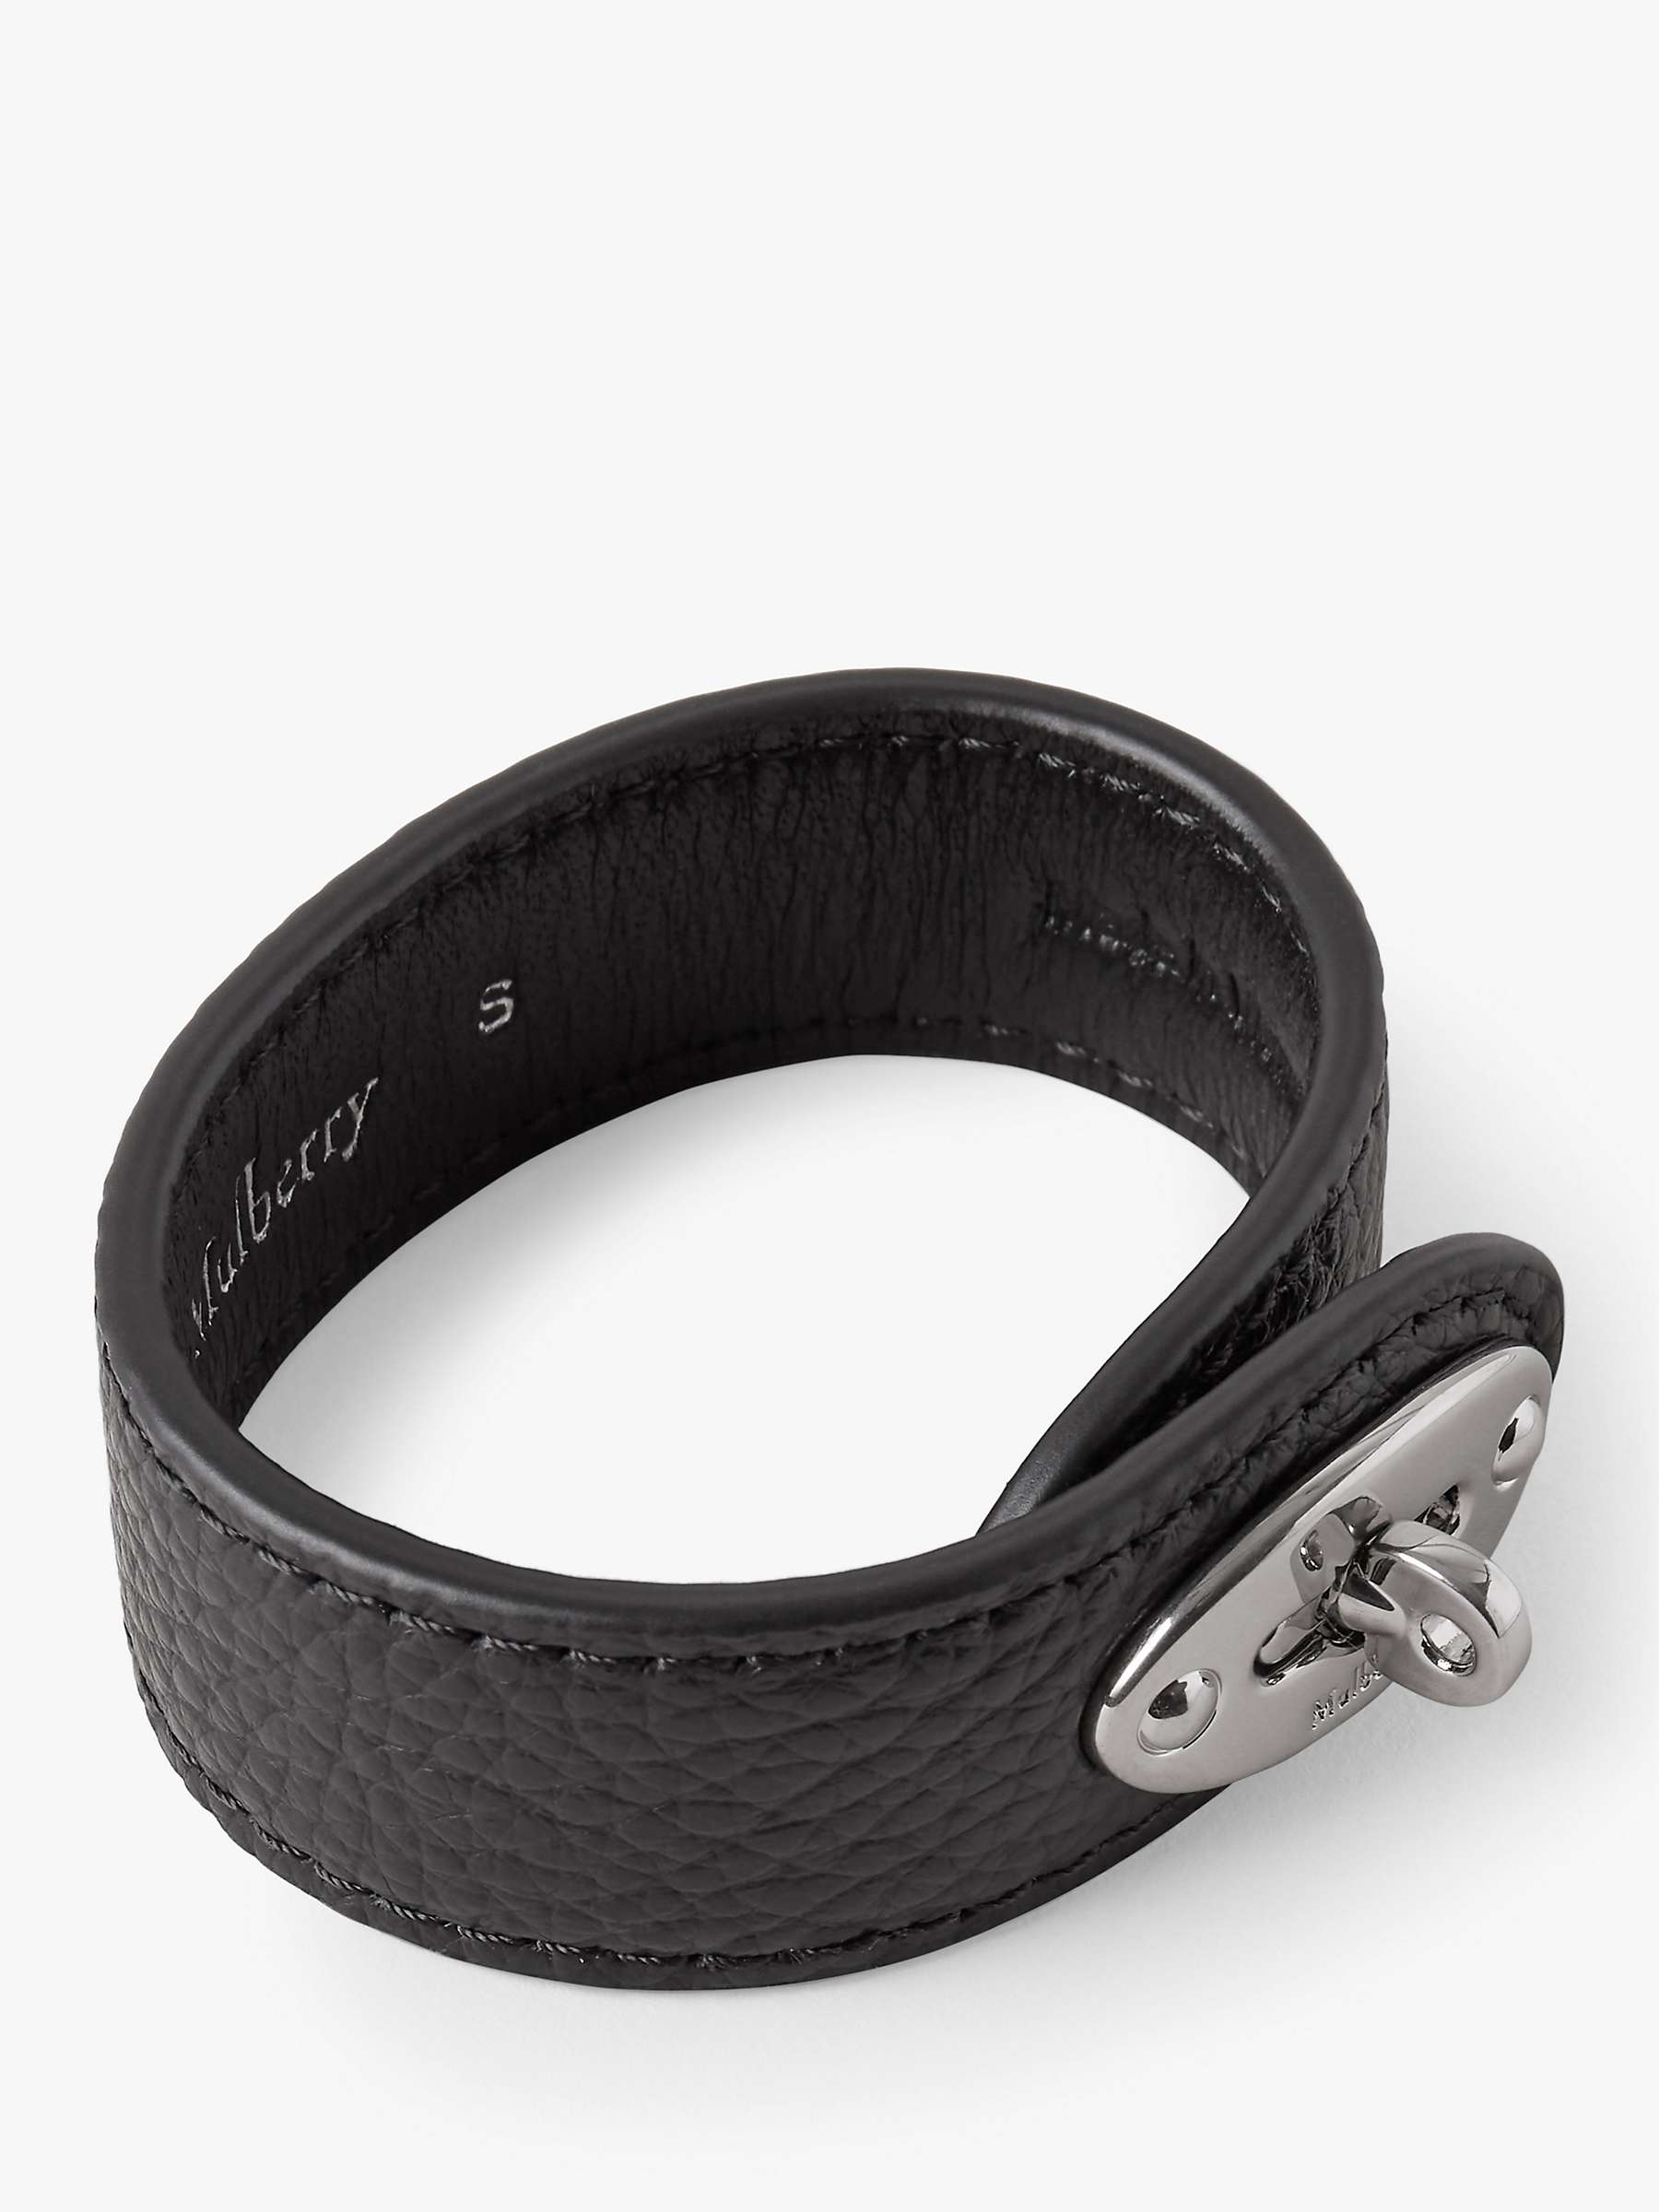 Buy Mulberry Bayswater Leather Bracelet Online at johnlewis.com